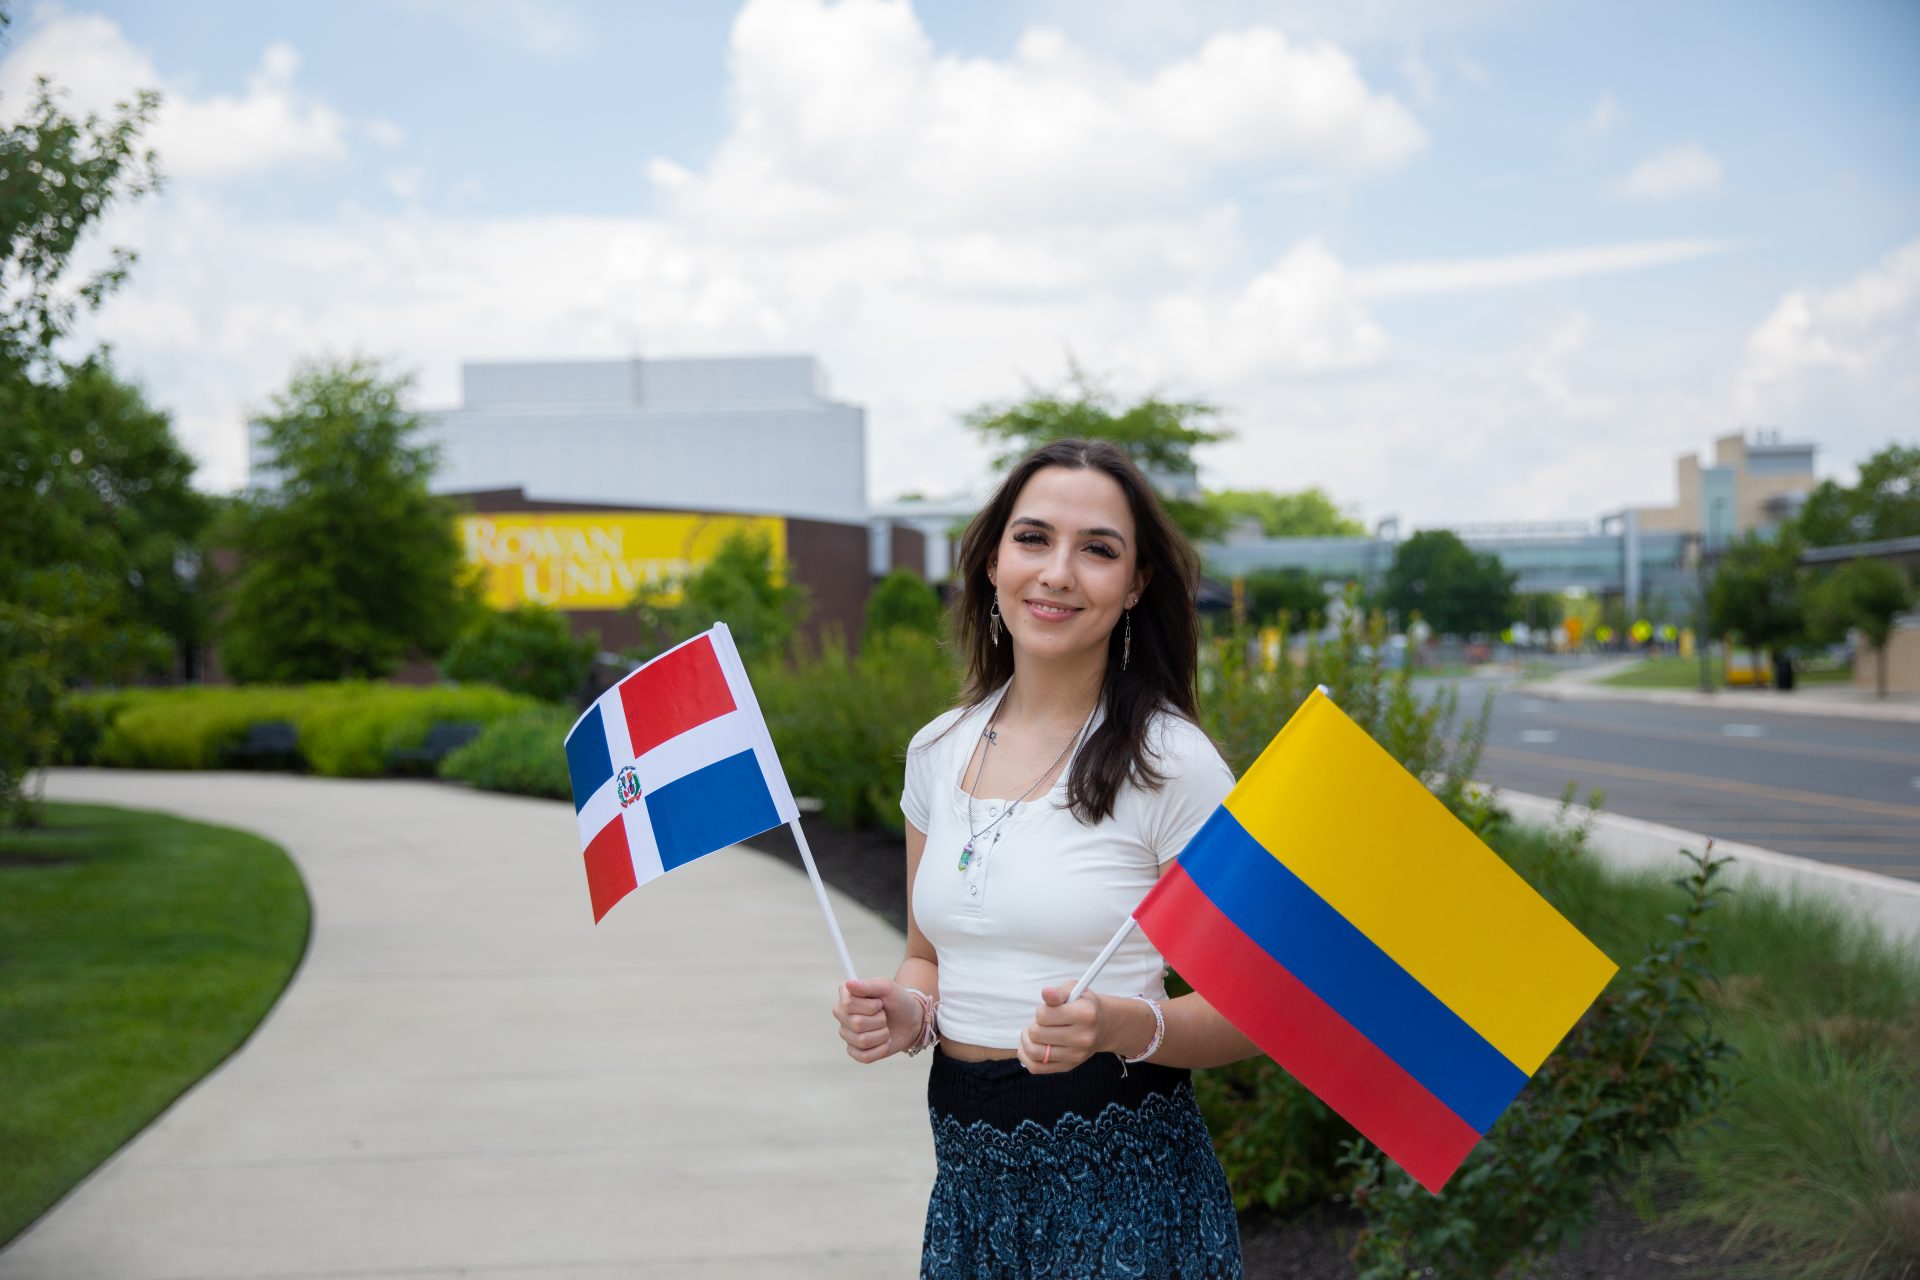 Bonnie holding two flags in her hands (Dominican Republic and Colombia).